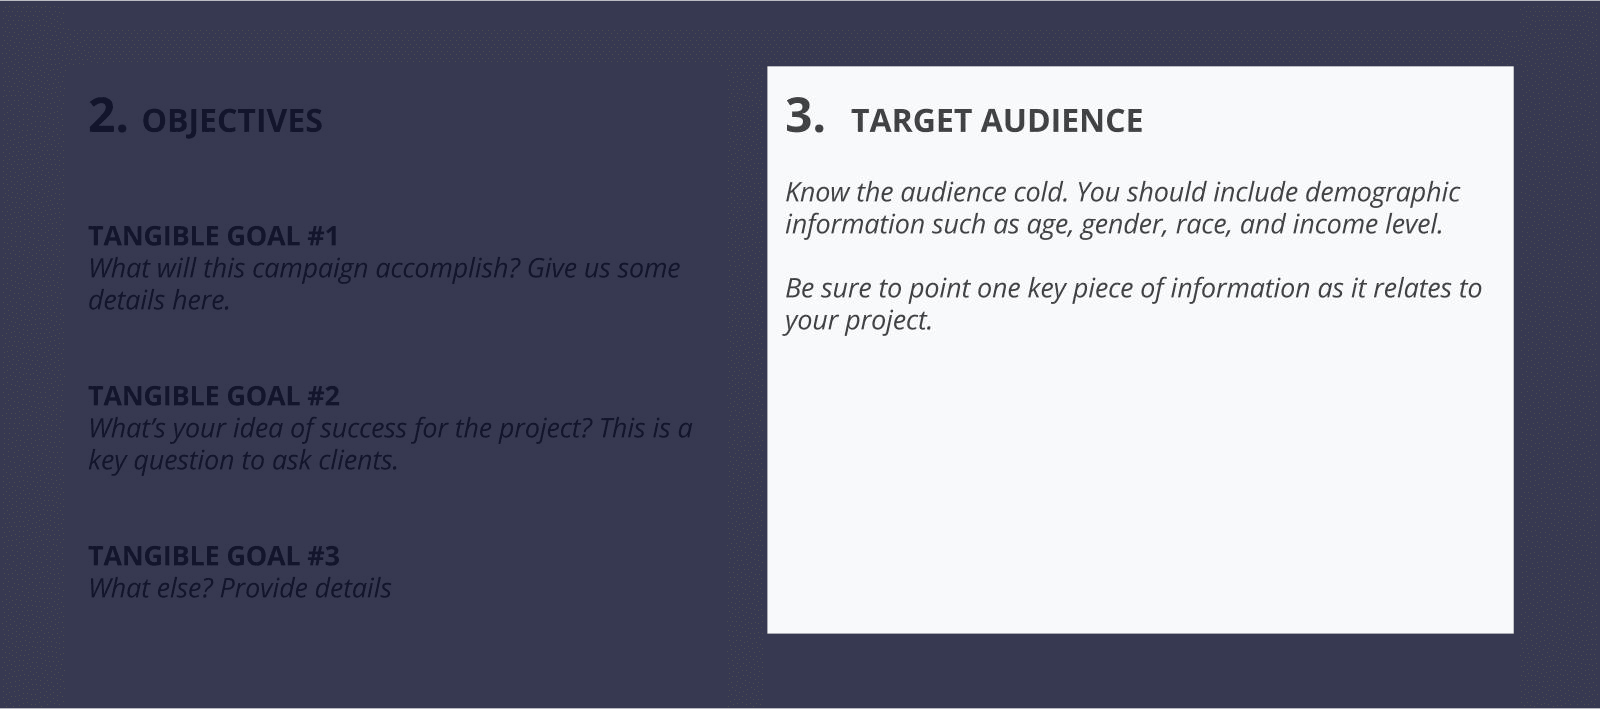 The Best Creative Brief Template For Video Agencies [Free Download] - Section 3 - Target audience